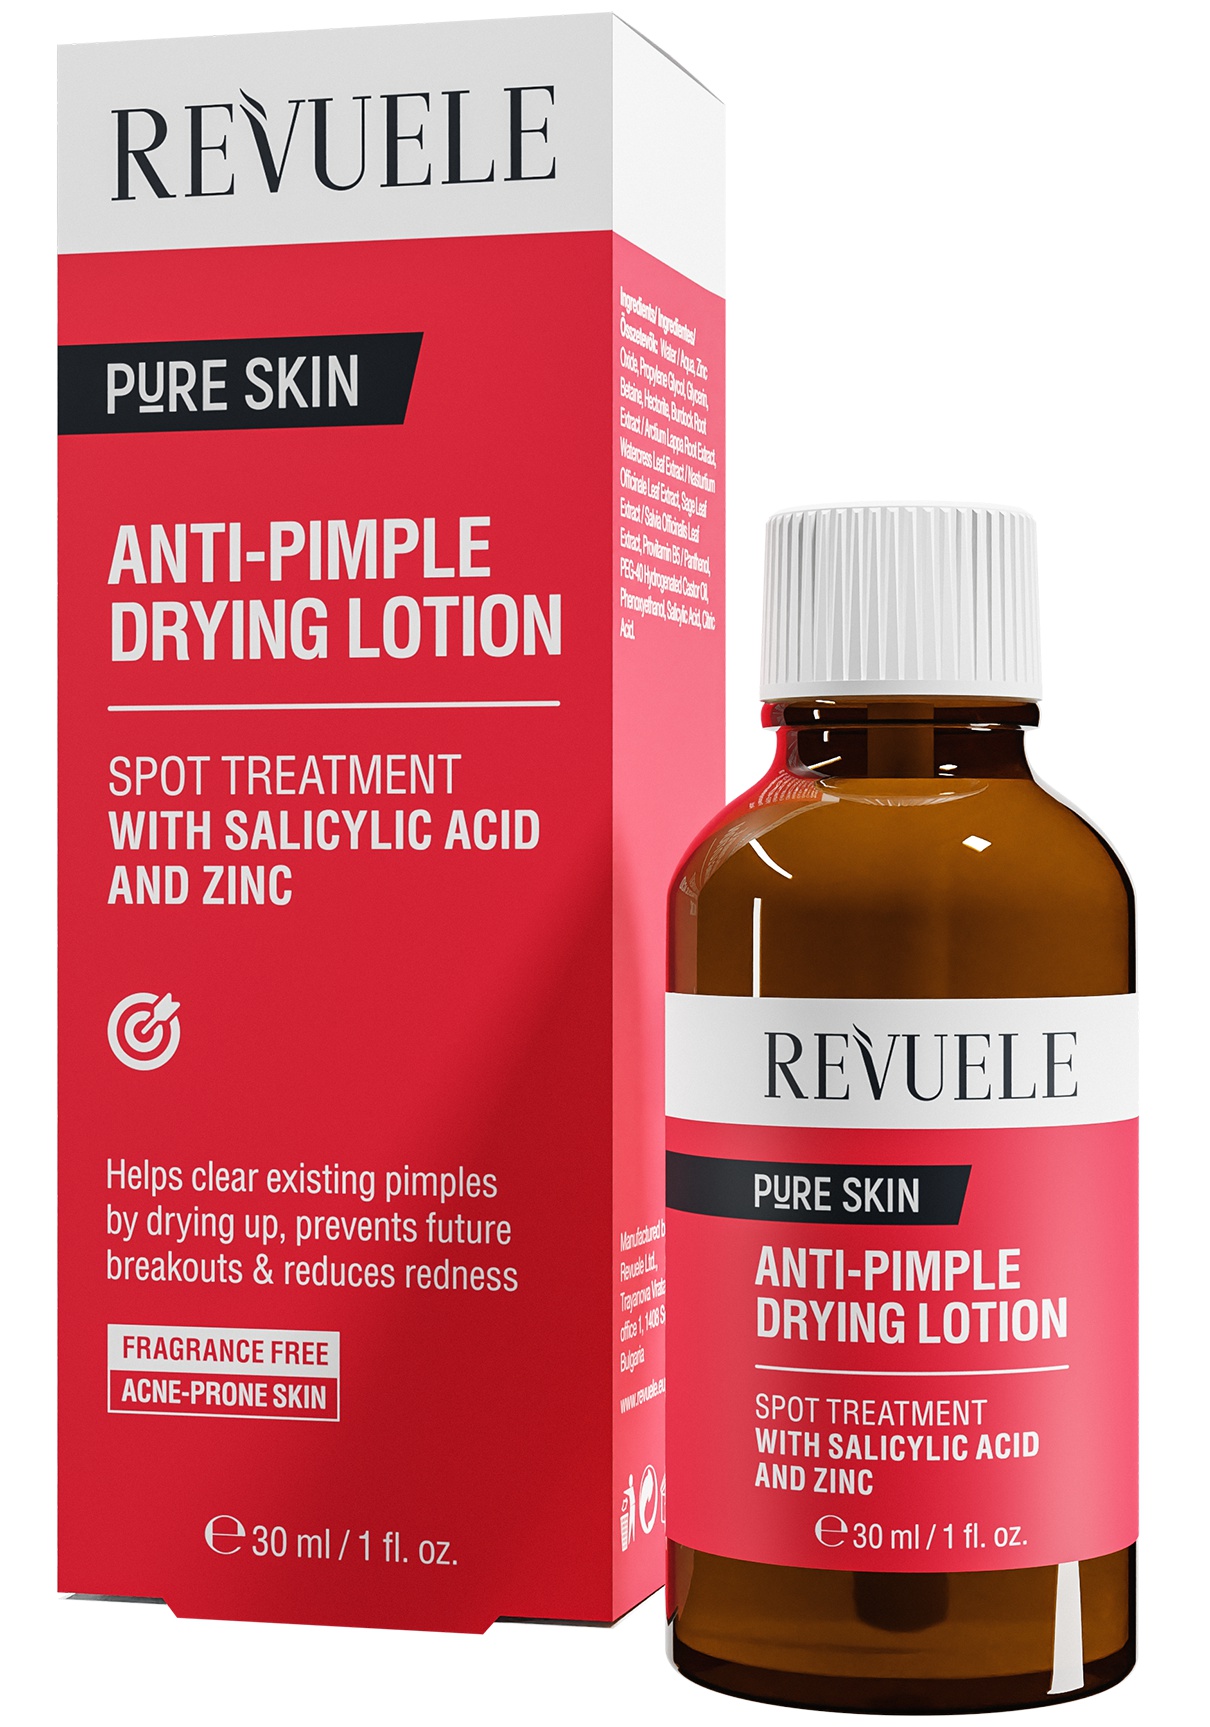 Revuele Pure Skin Anti-Pimple Drying Lotion